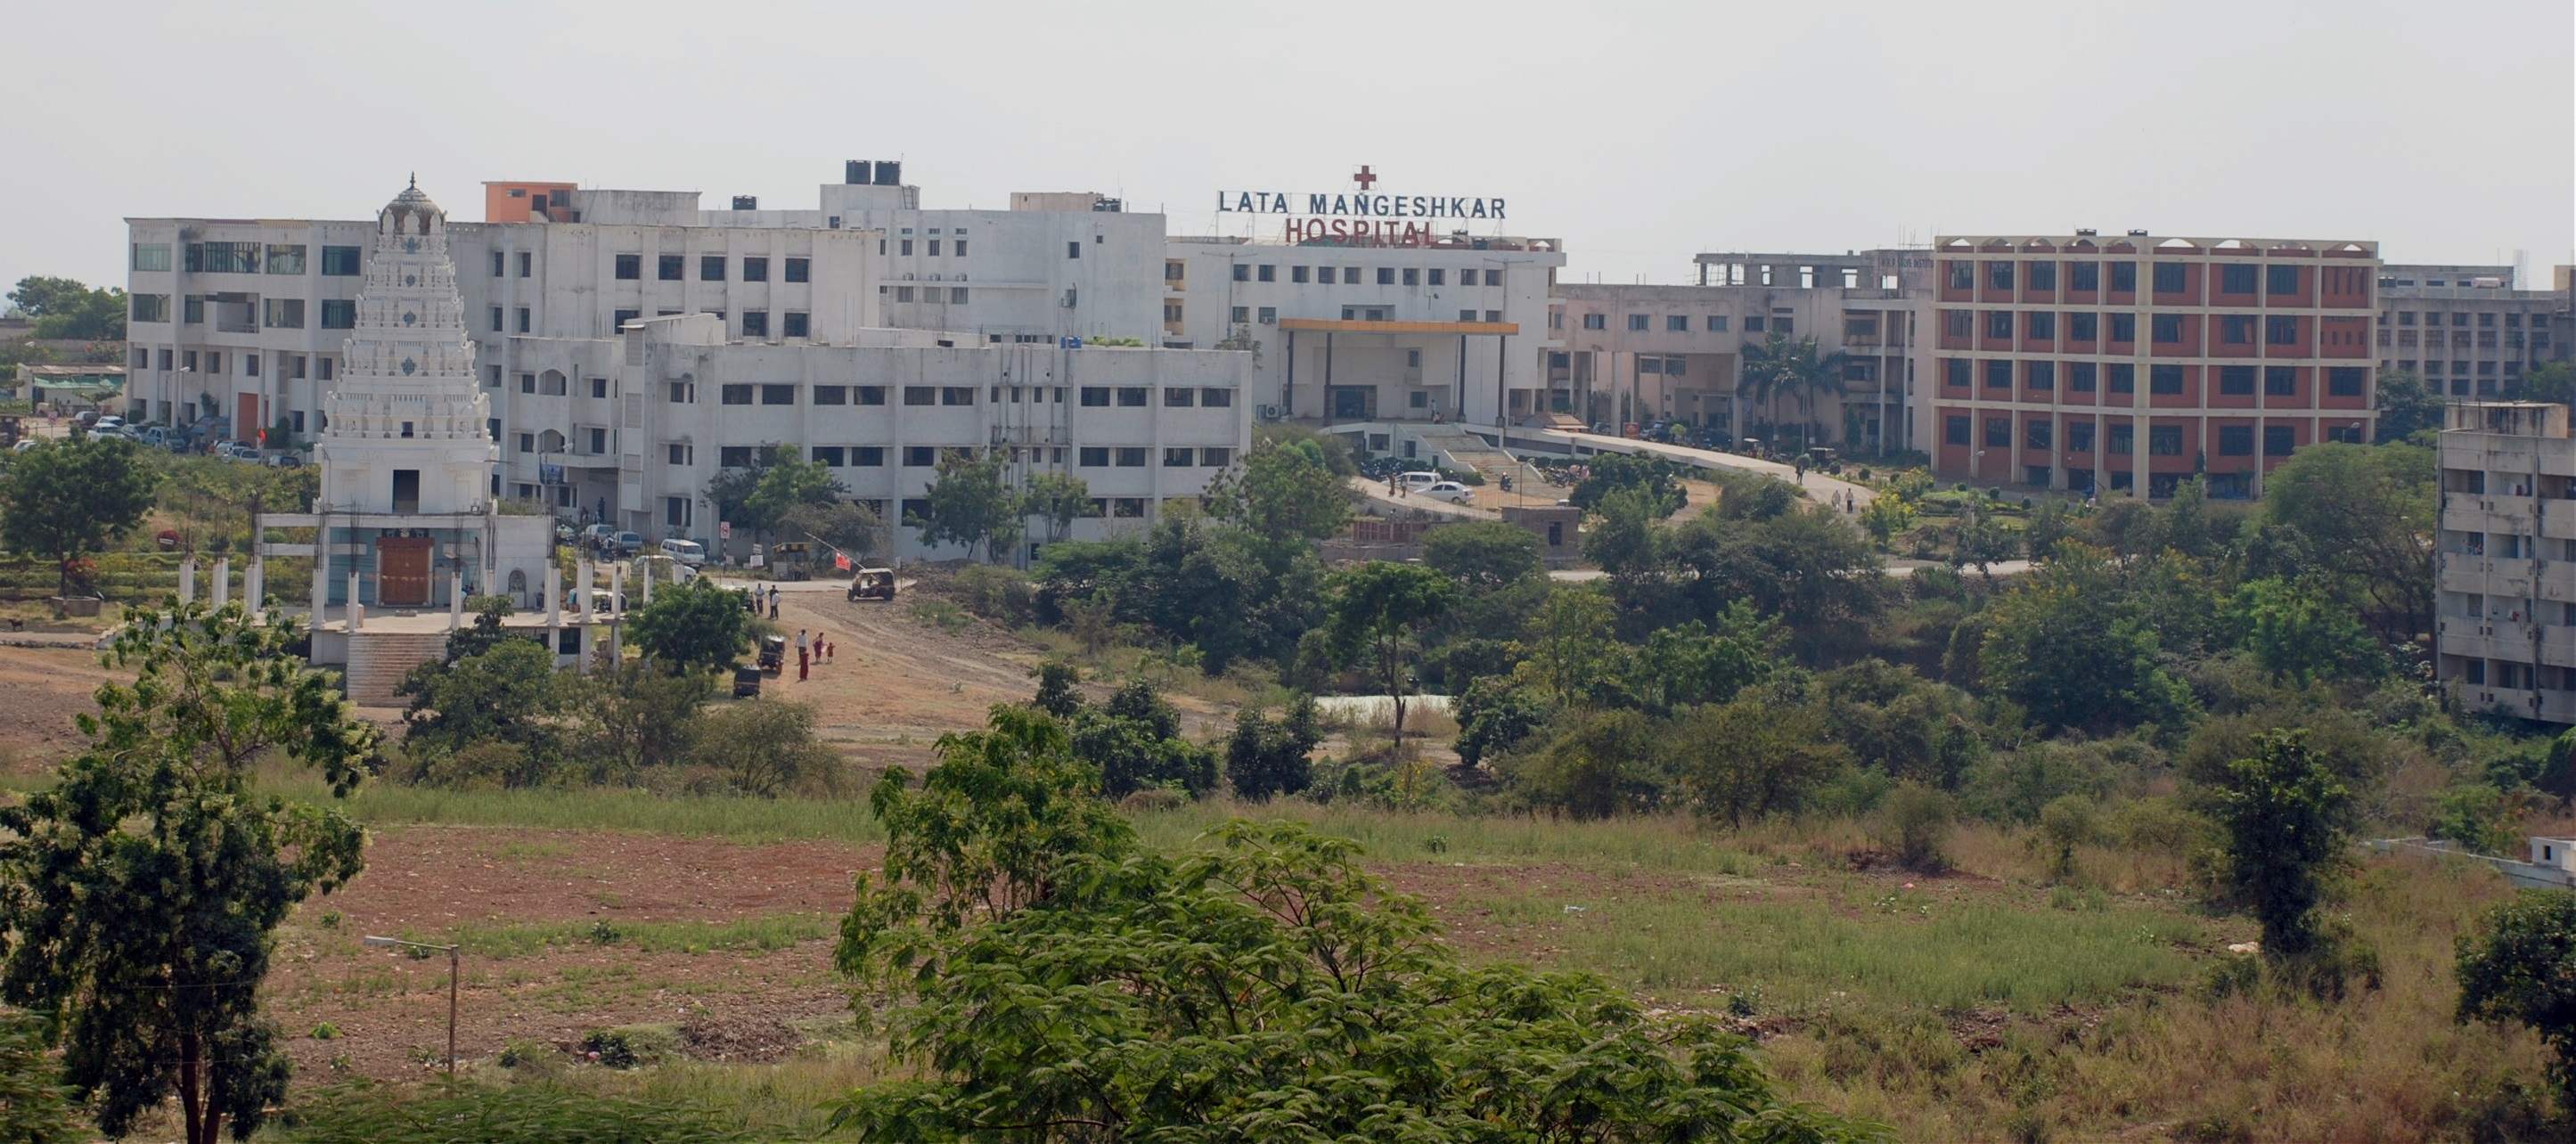 VSPM’S College of Physiotherapy, Nagpur Image